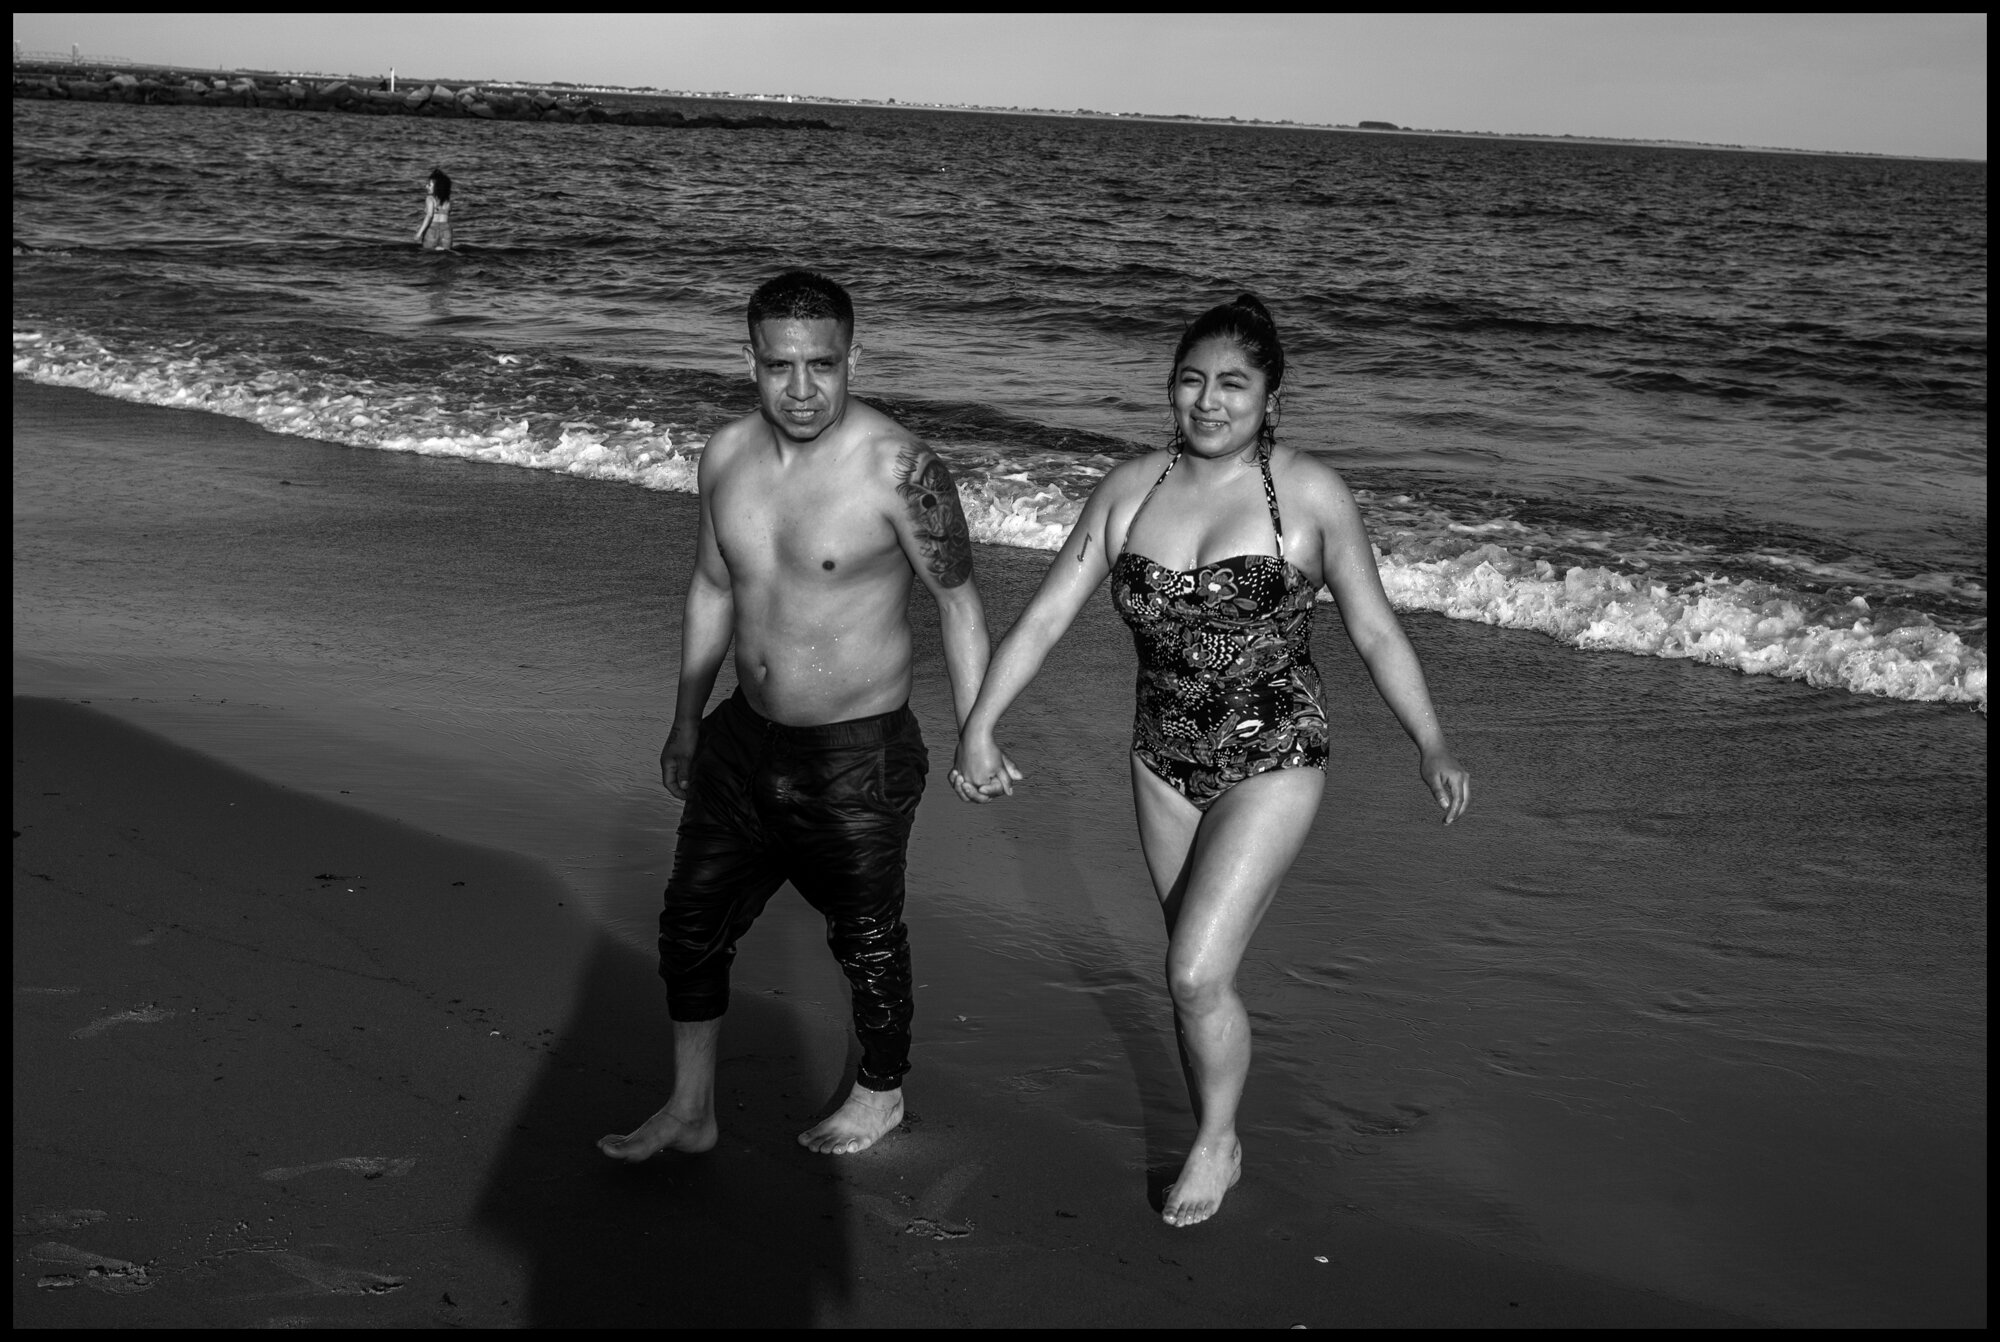  Luis and Alexandra, both from Ecuador.Coney Island, New York.  May 16, 2020. © Peter Turnley.  ID# 49-017 